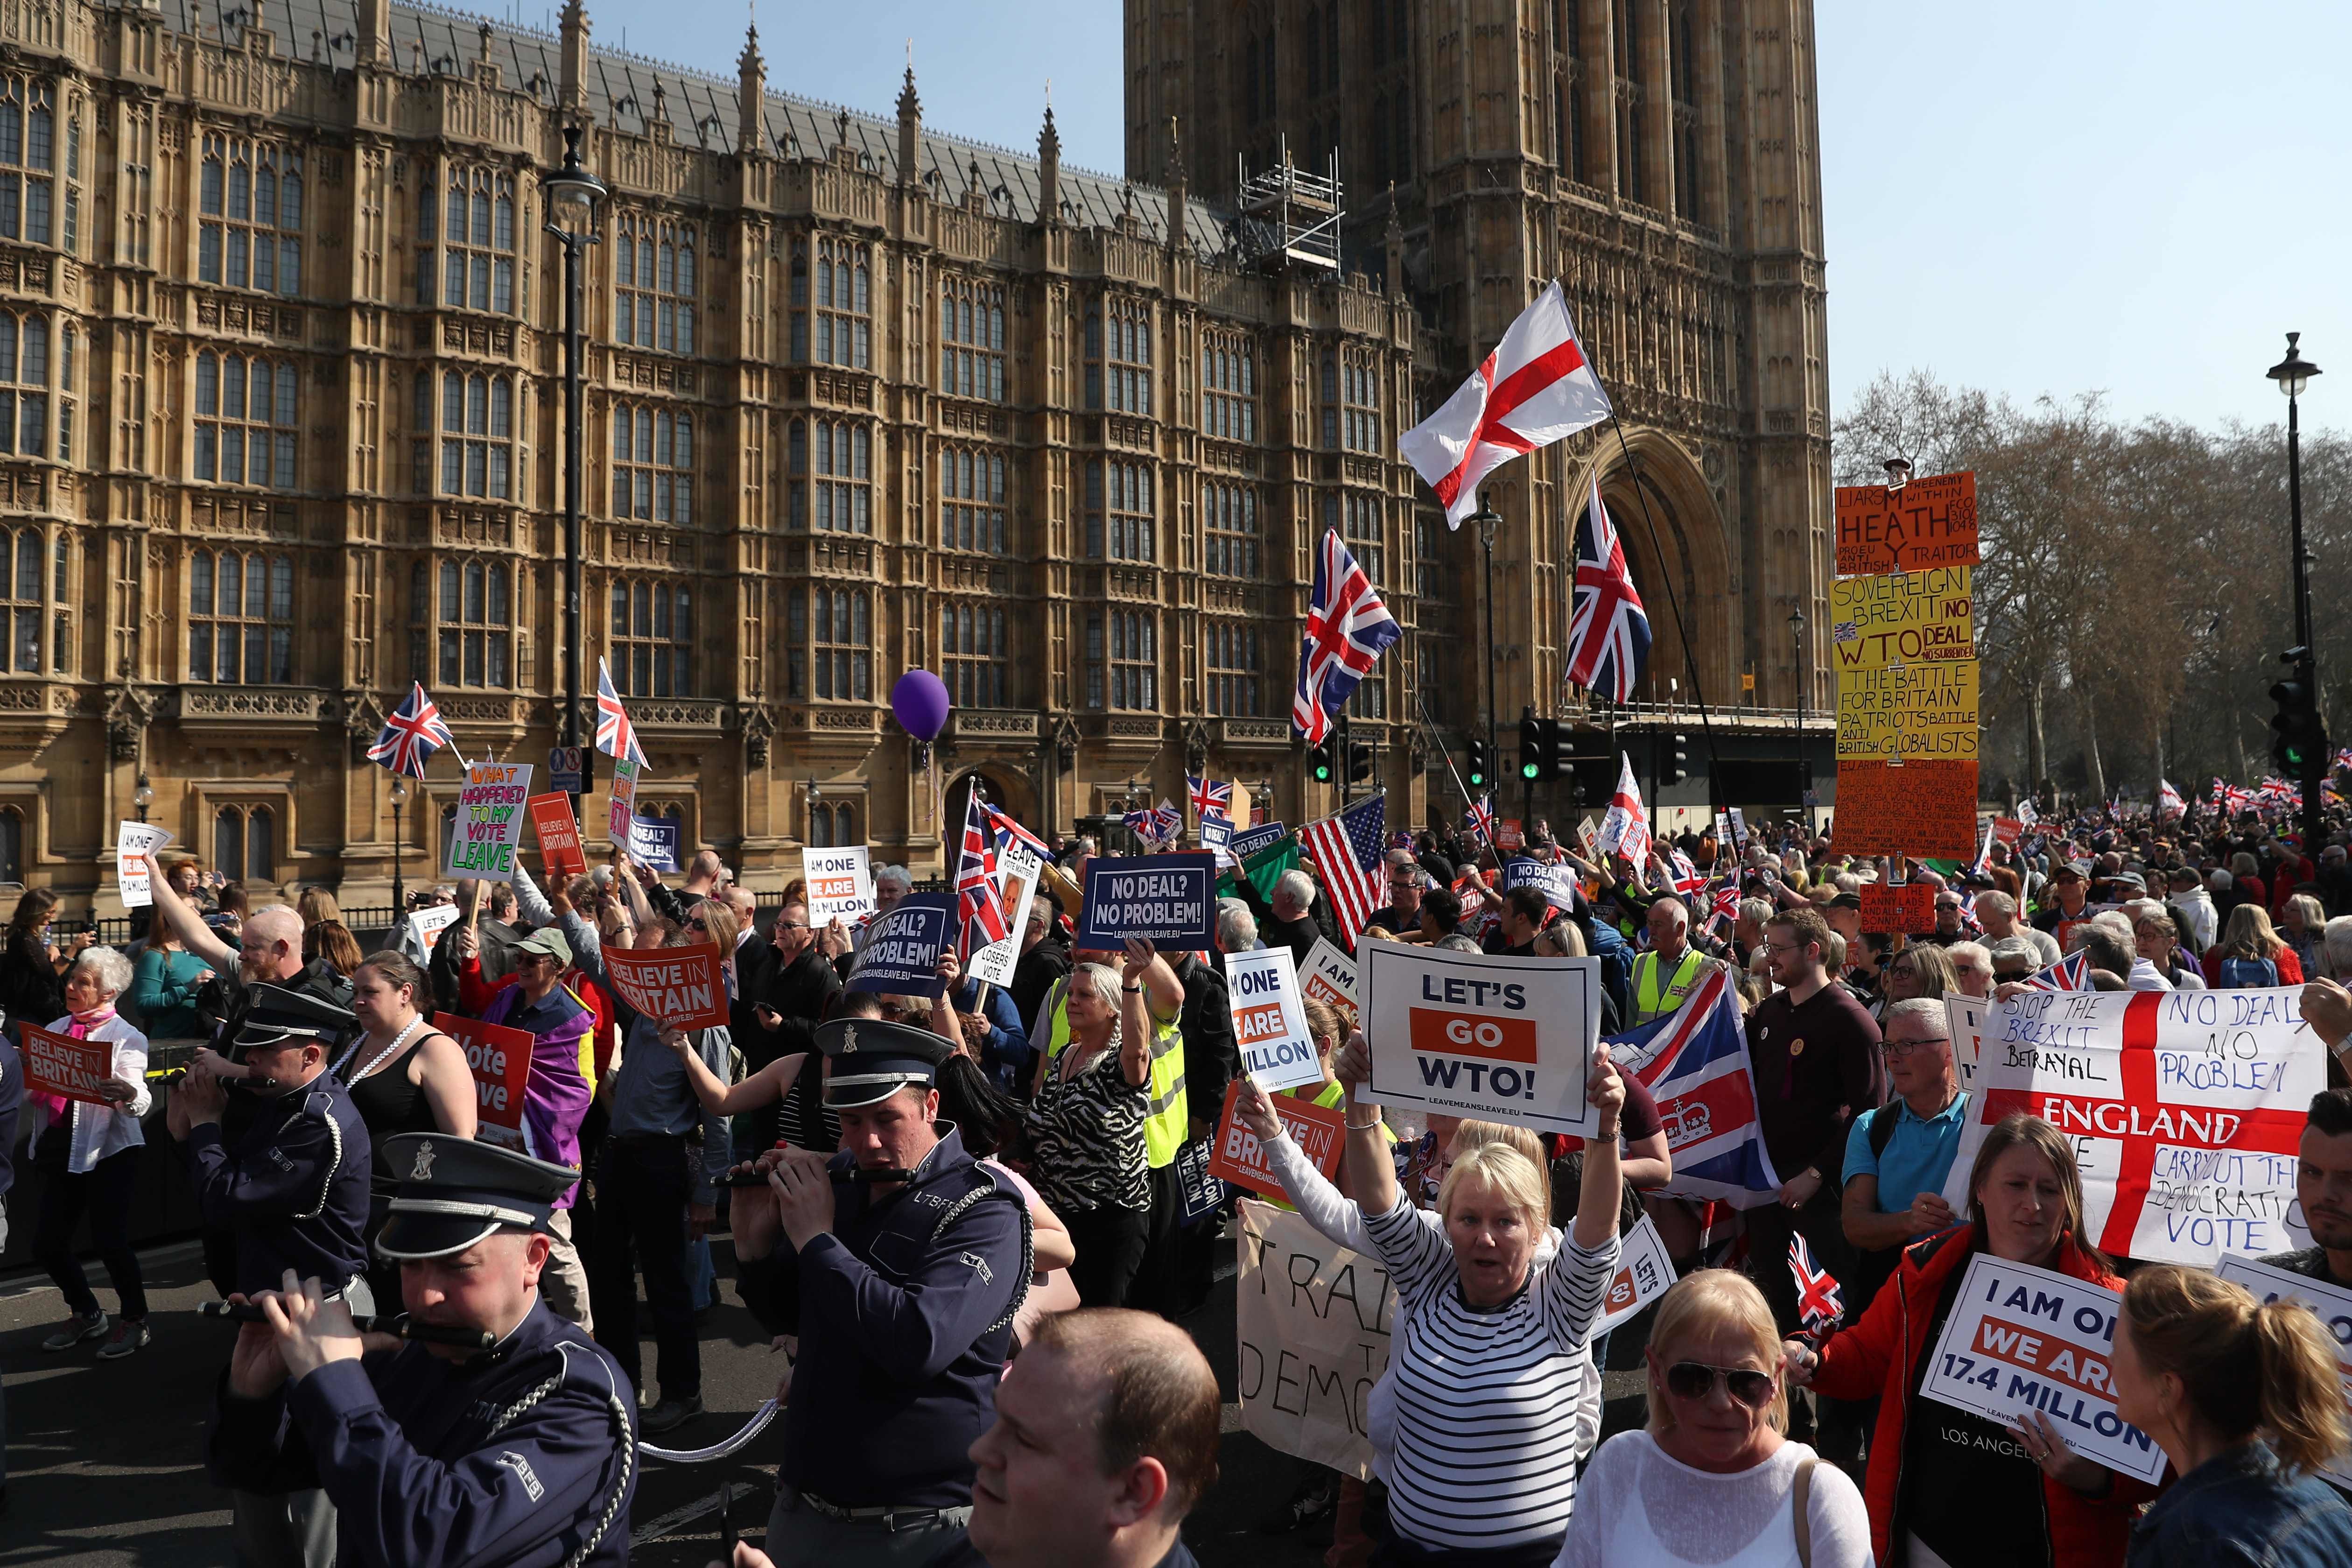 Brexit supporters demonstrated outside Parliament as lawmakers debated inside, London, March 29, 2019.